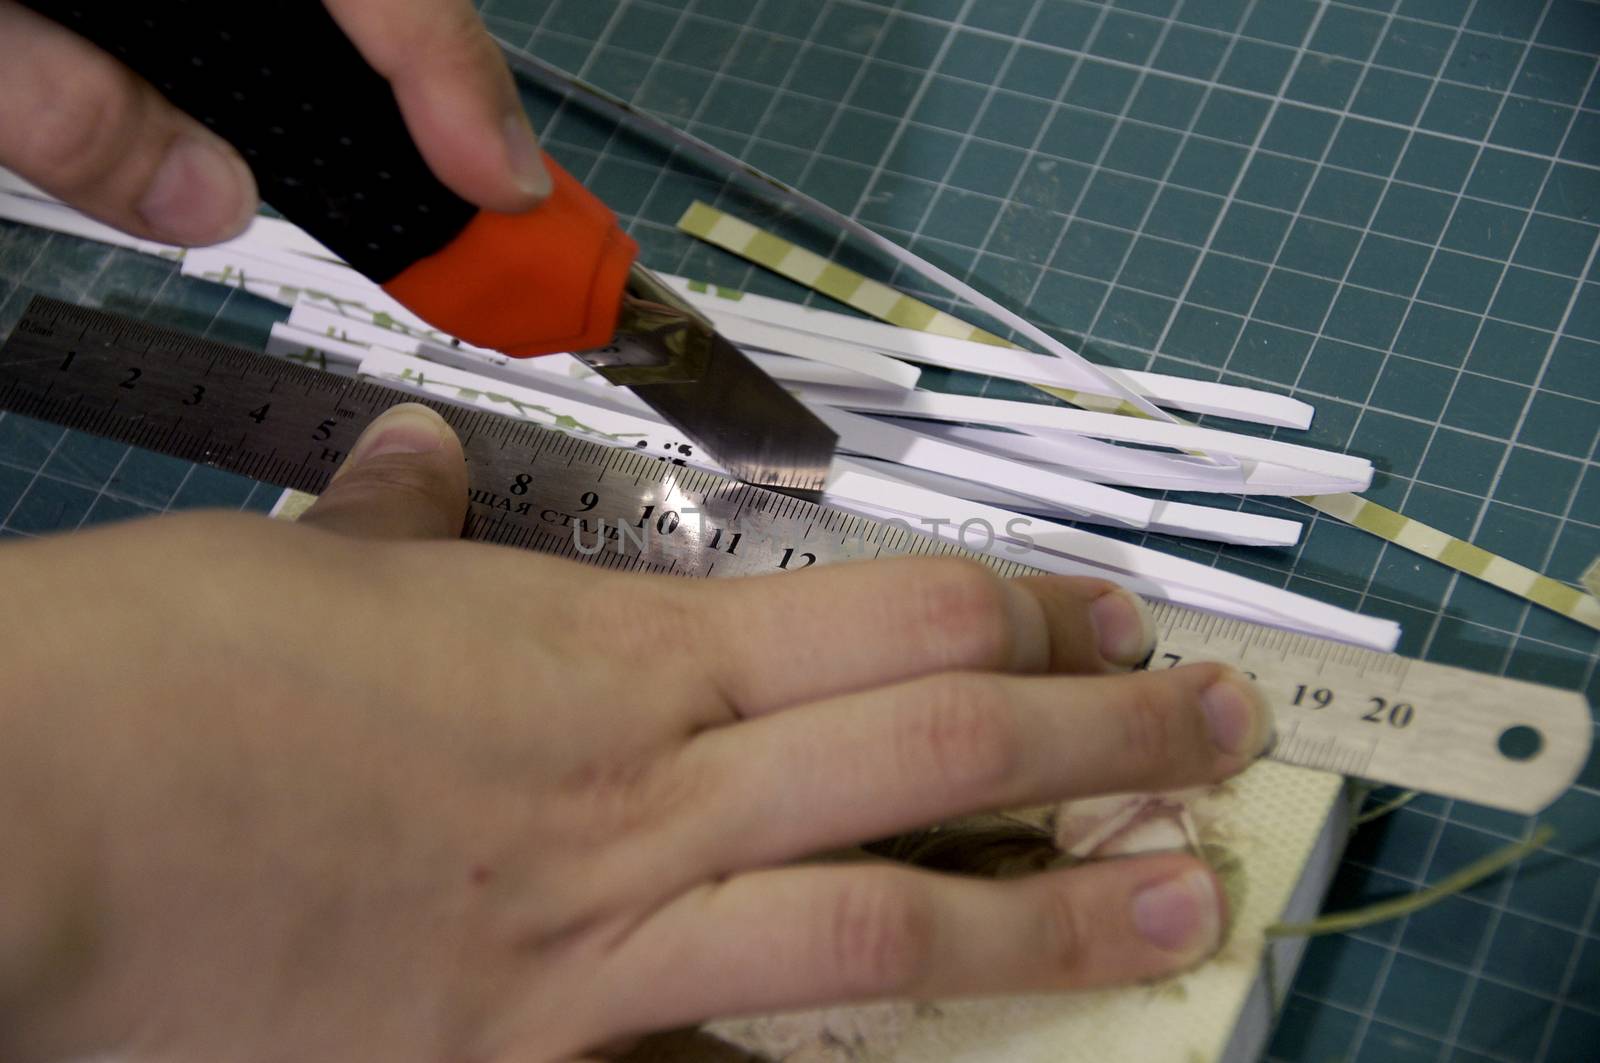 the process of handmade creating of the diary from special scrapbooking paper, paper flowers and other decorative elements